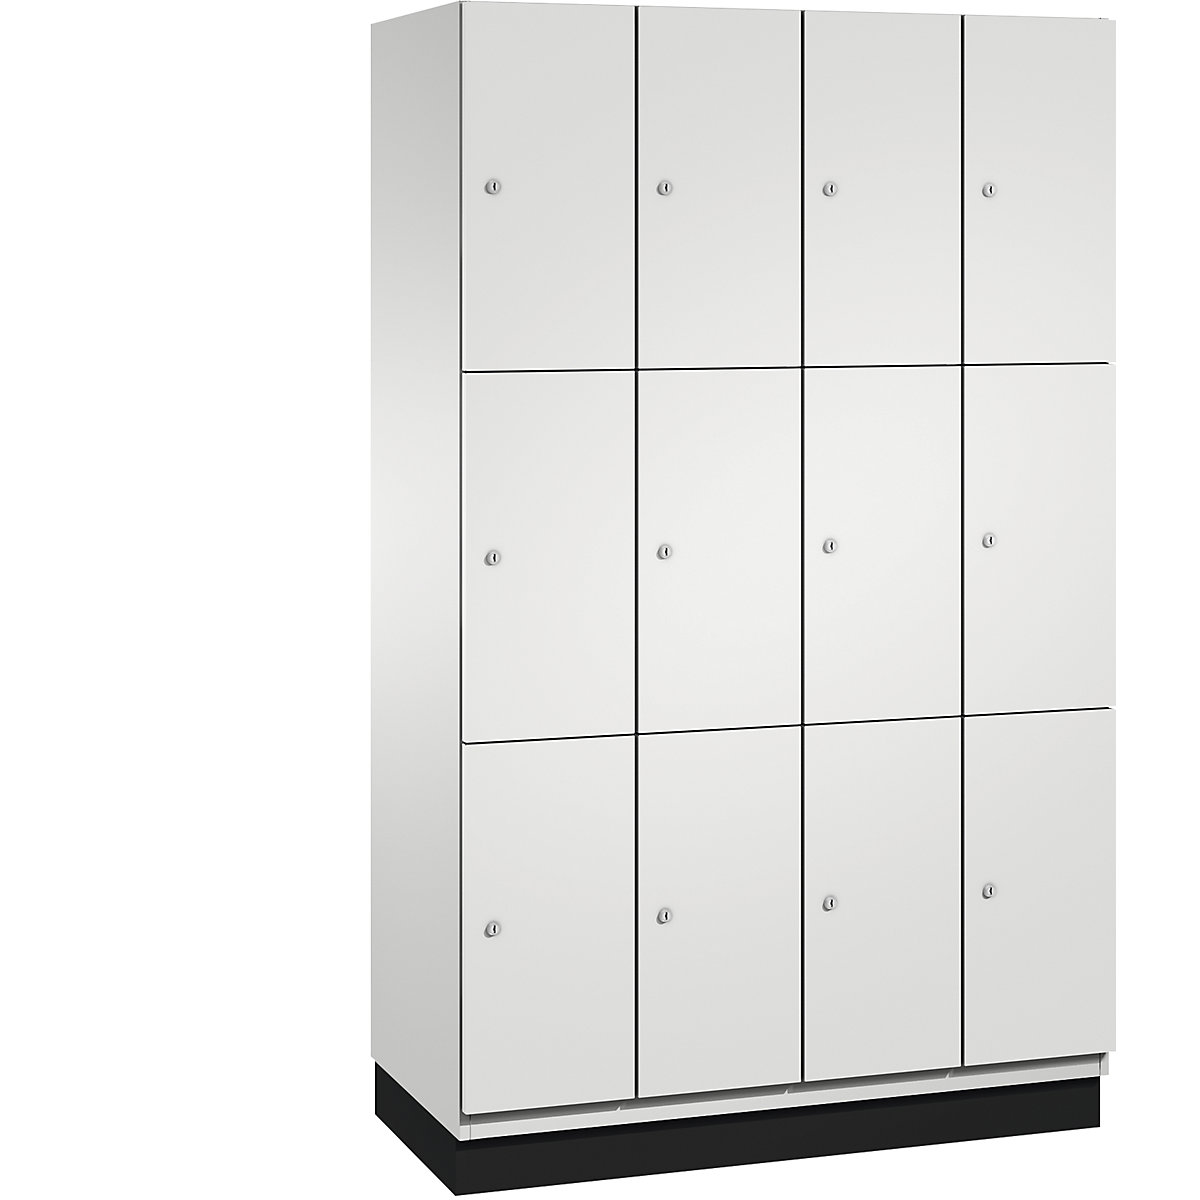 CAMBIO compartment locker with sheet steel doors – C+P, 12 compartments, width 1200 mm, body light grey / door light grey, compartment height 616.6 mm-15